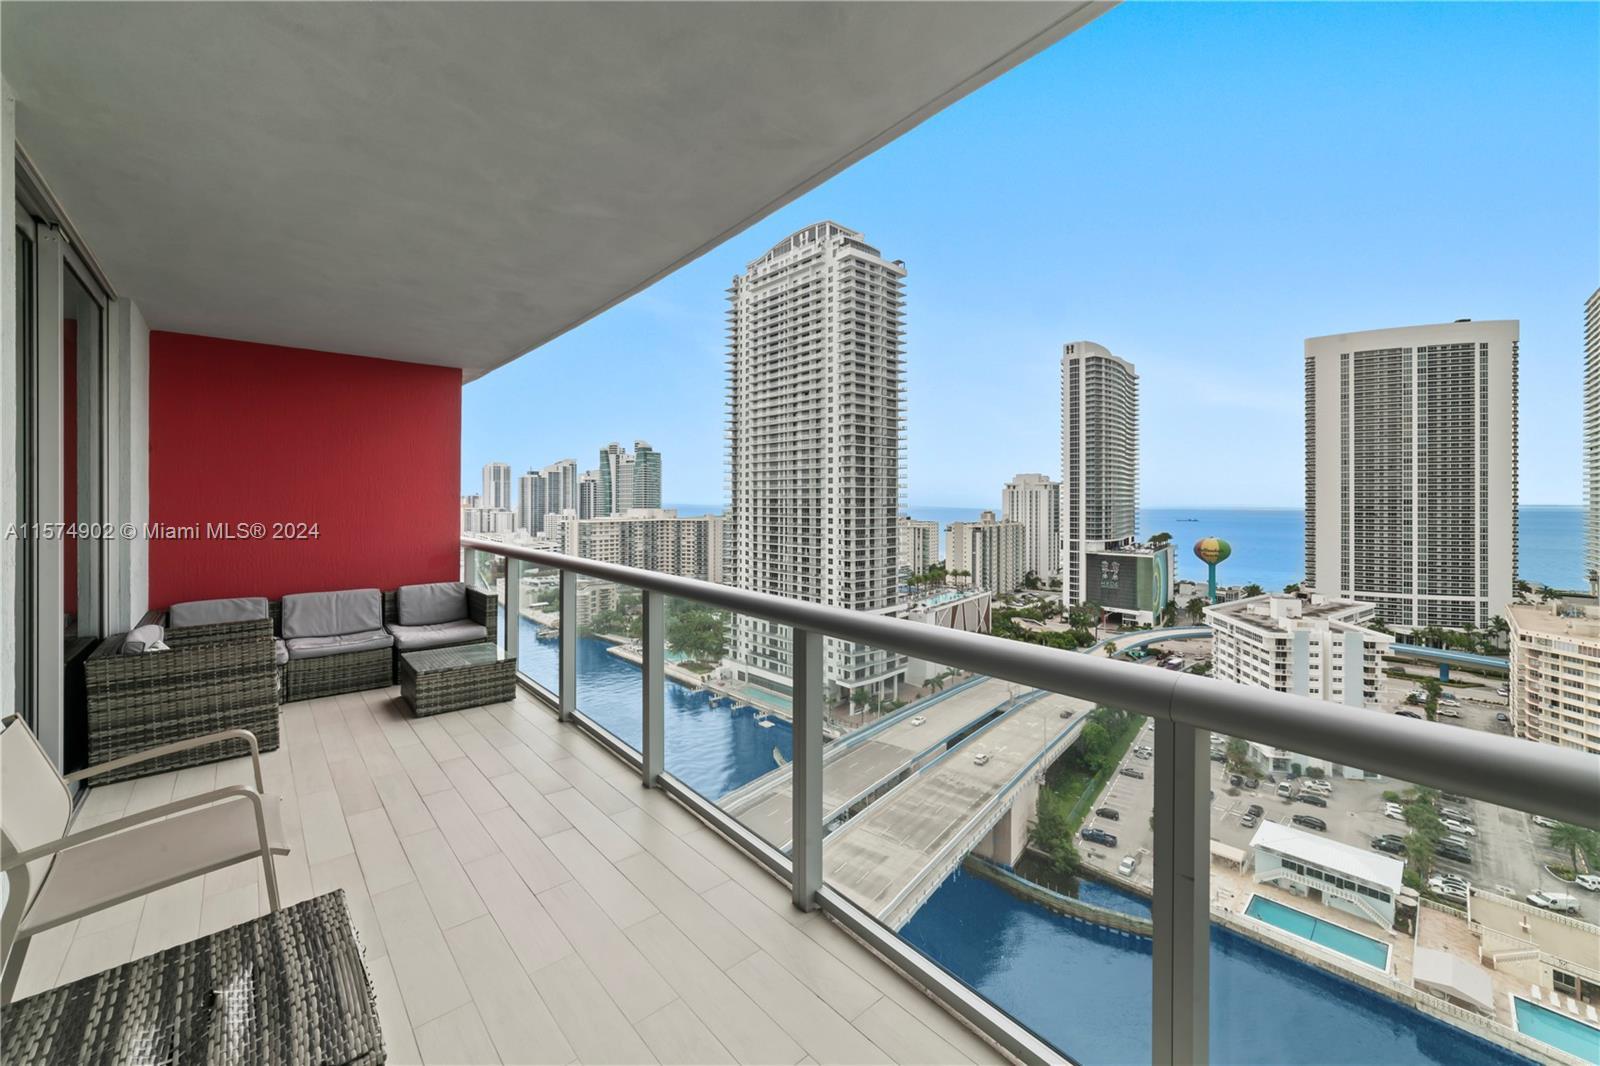 This exquisite 3 Bed & 3 Bath unit offers unparalleled luxury and comfort with breathtaking views of